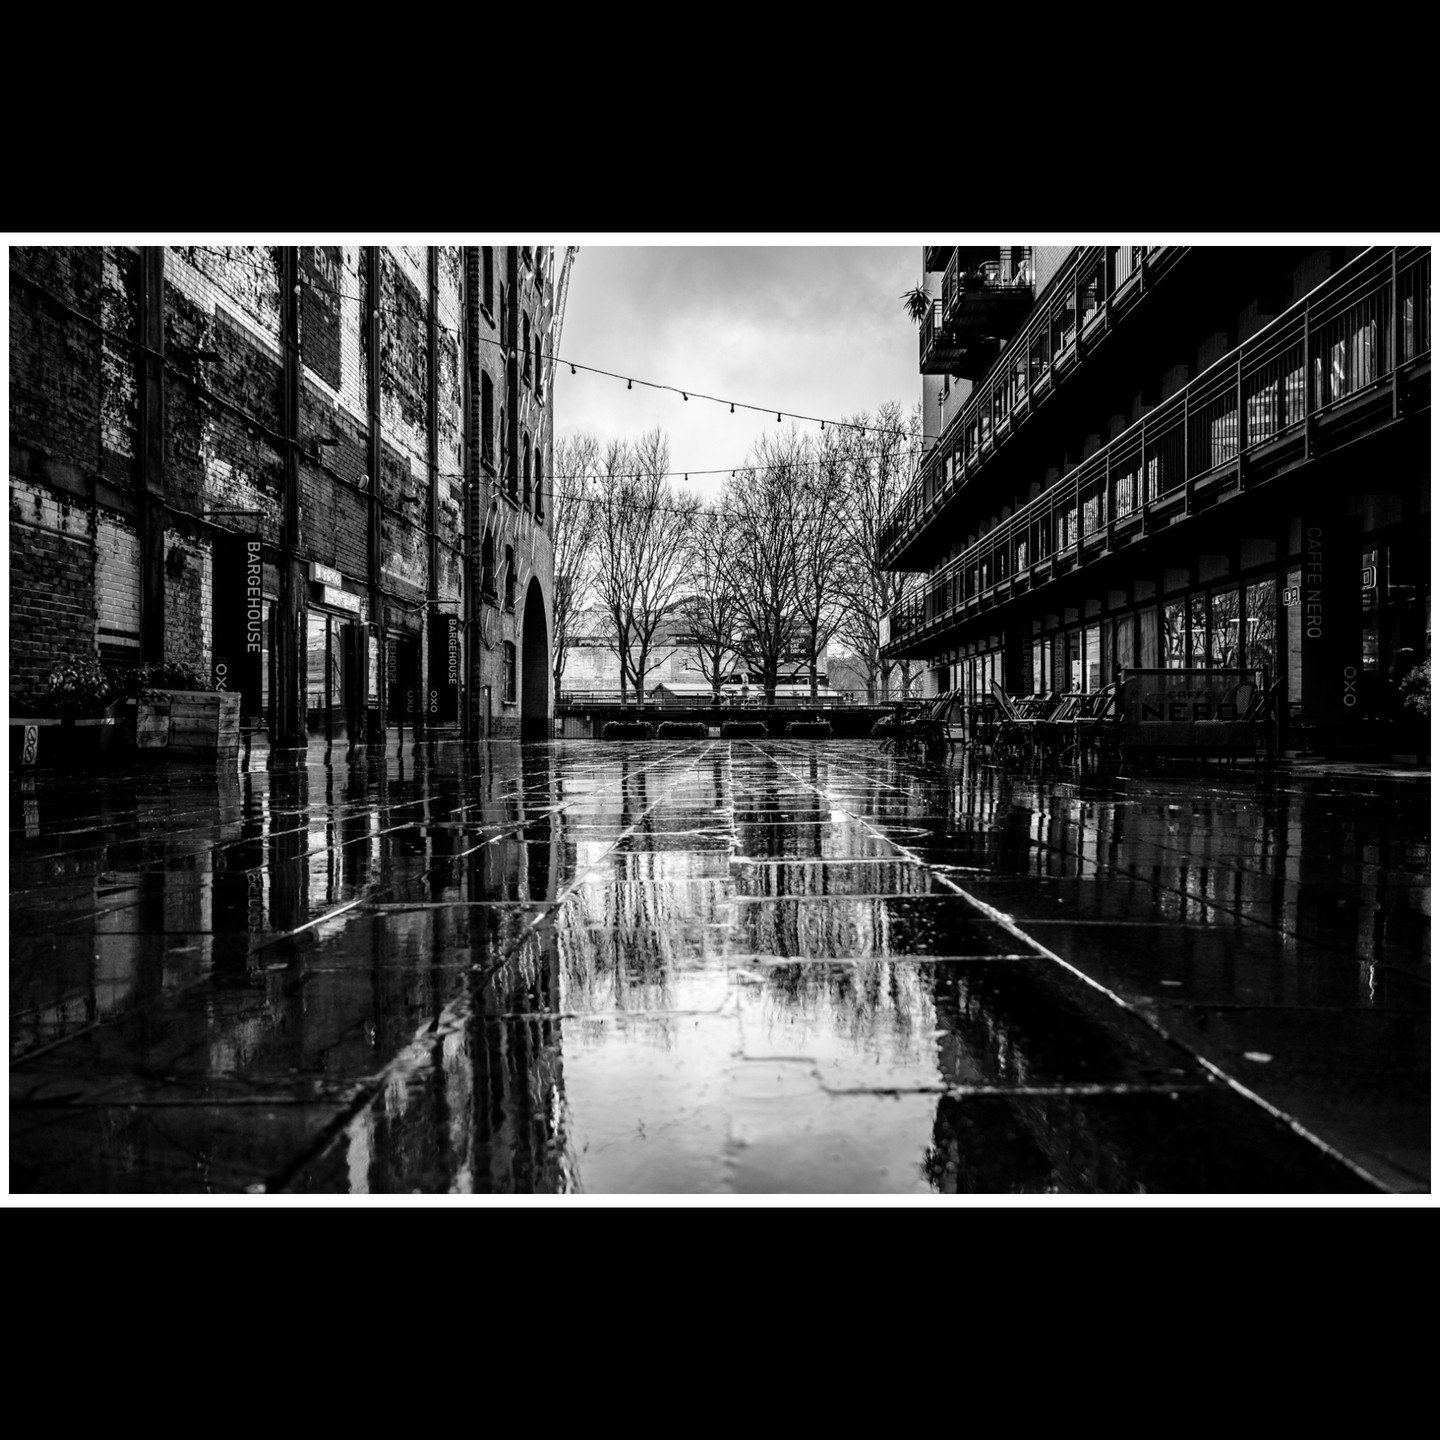 A slightly damp day in London back in March. (1/3)
#bnwphotography #londonphotography #fujifilm #fujifilmxseries #fujifilmxt5 #reflections #urbanphotography #lowkeyphotography